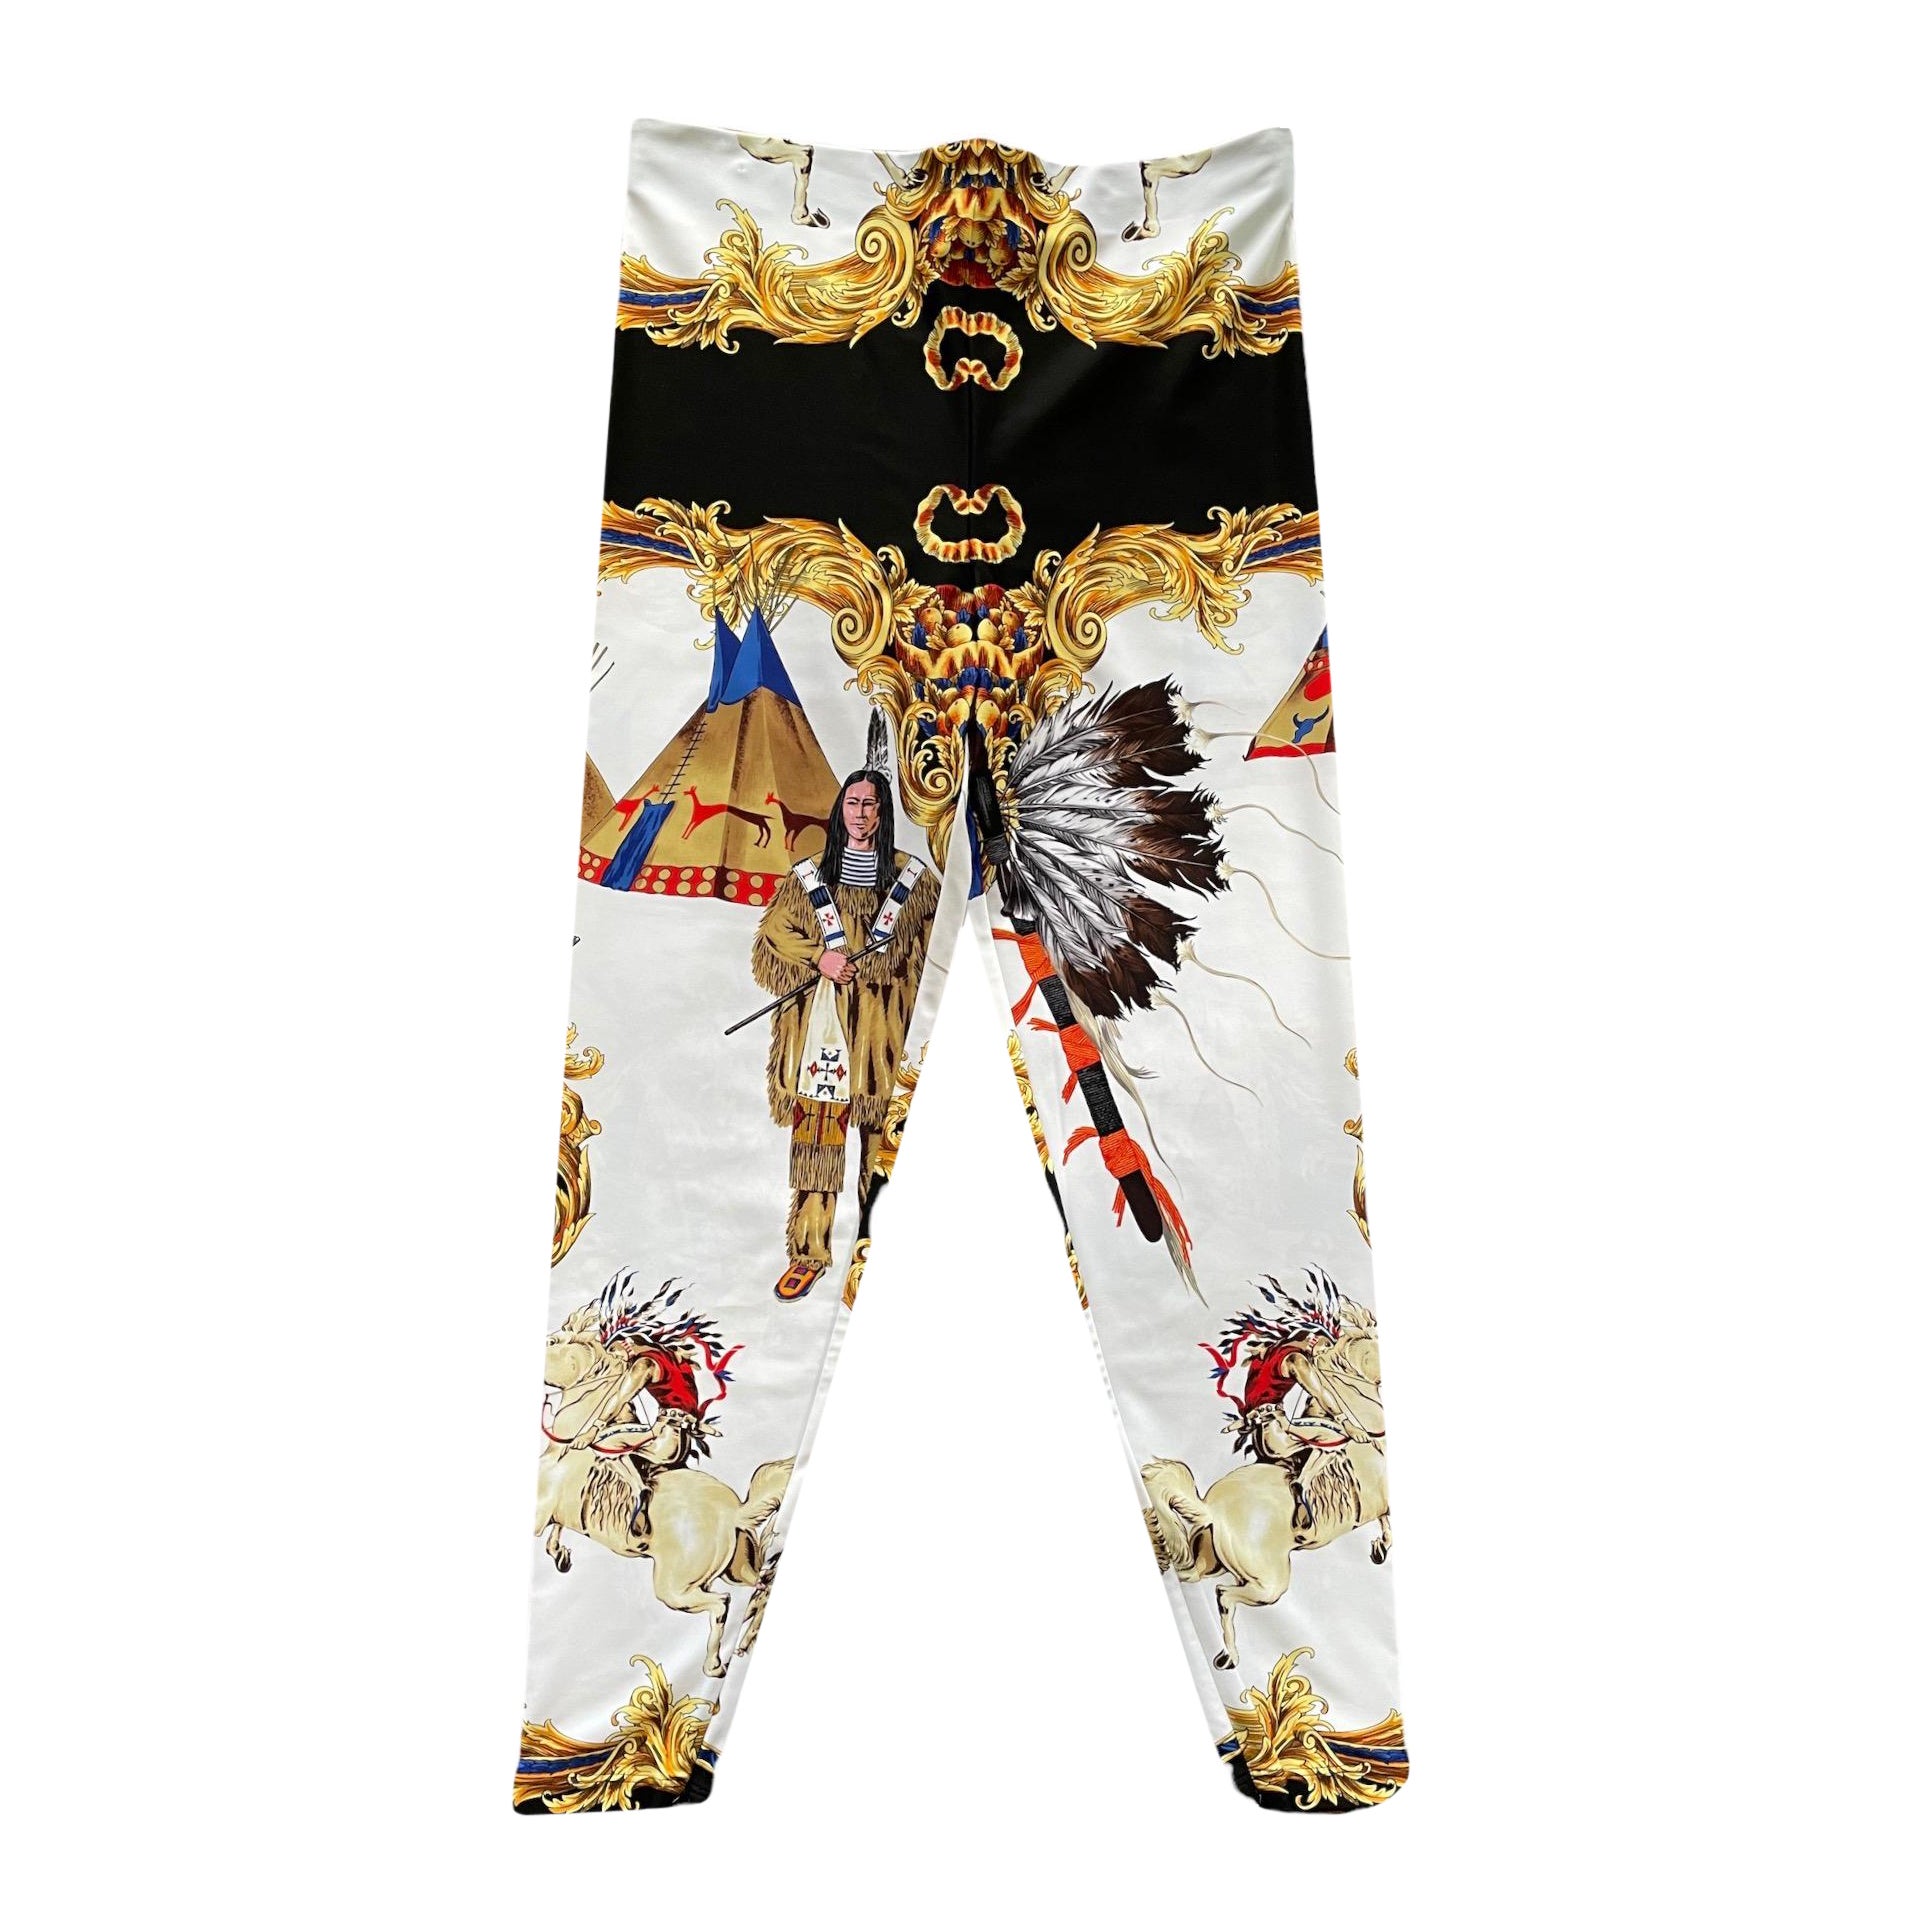 Spring 2018 Ready to Wear Native Americans  Versace Tribute FW 1992 pants